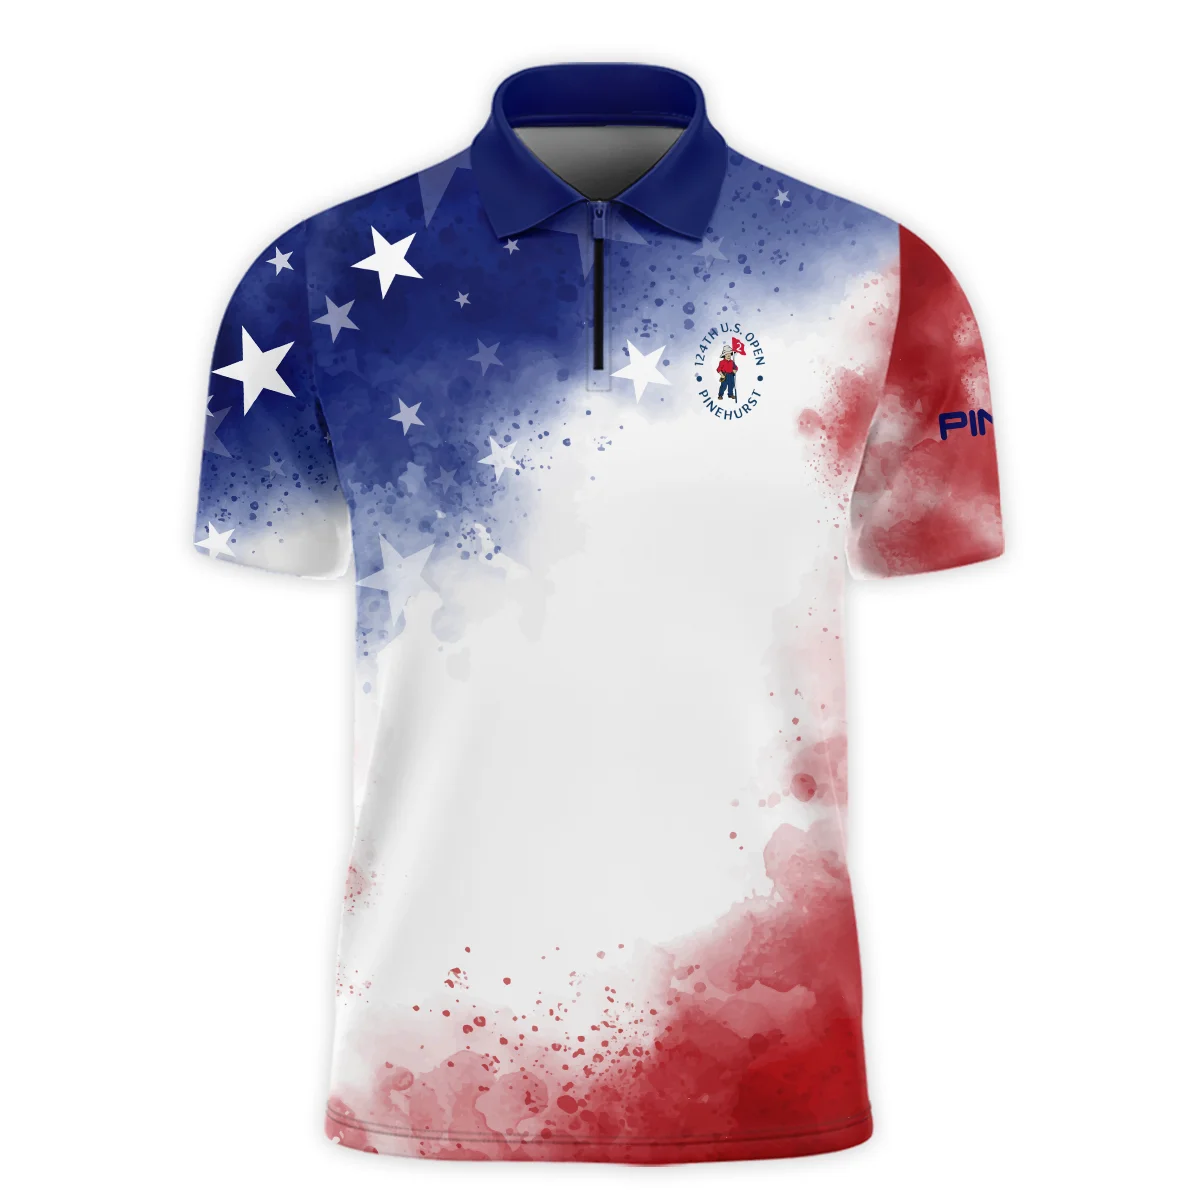 124th U.S. Open Pinehurst Ping Blue Red Watercolor Star White Backgound Polo Shirt Style Classic Polo Shirt For Men